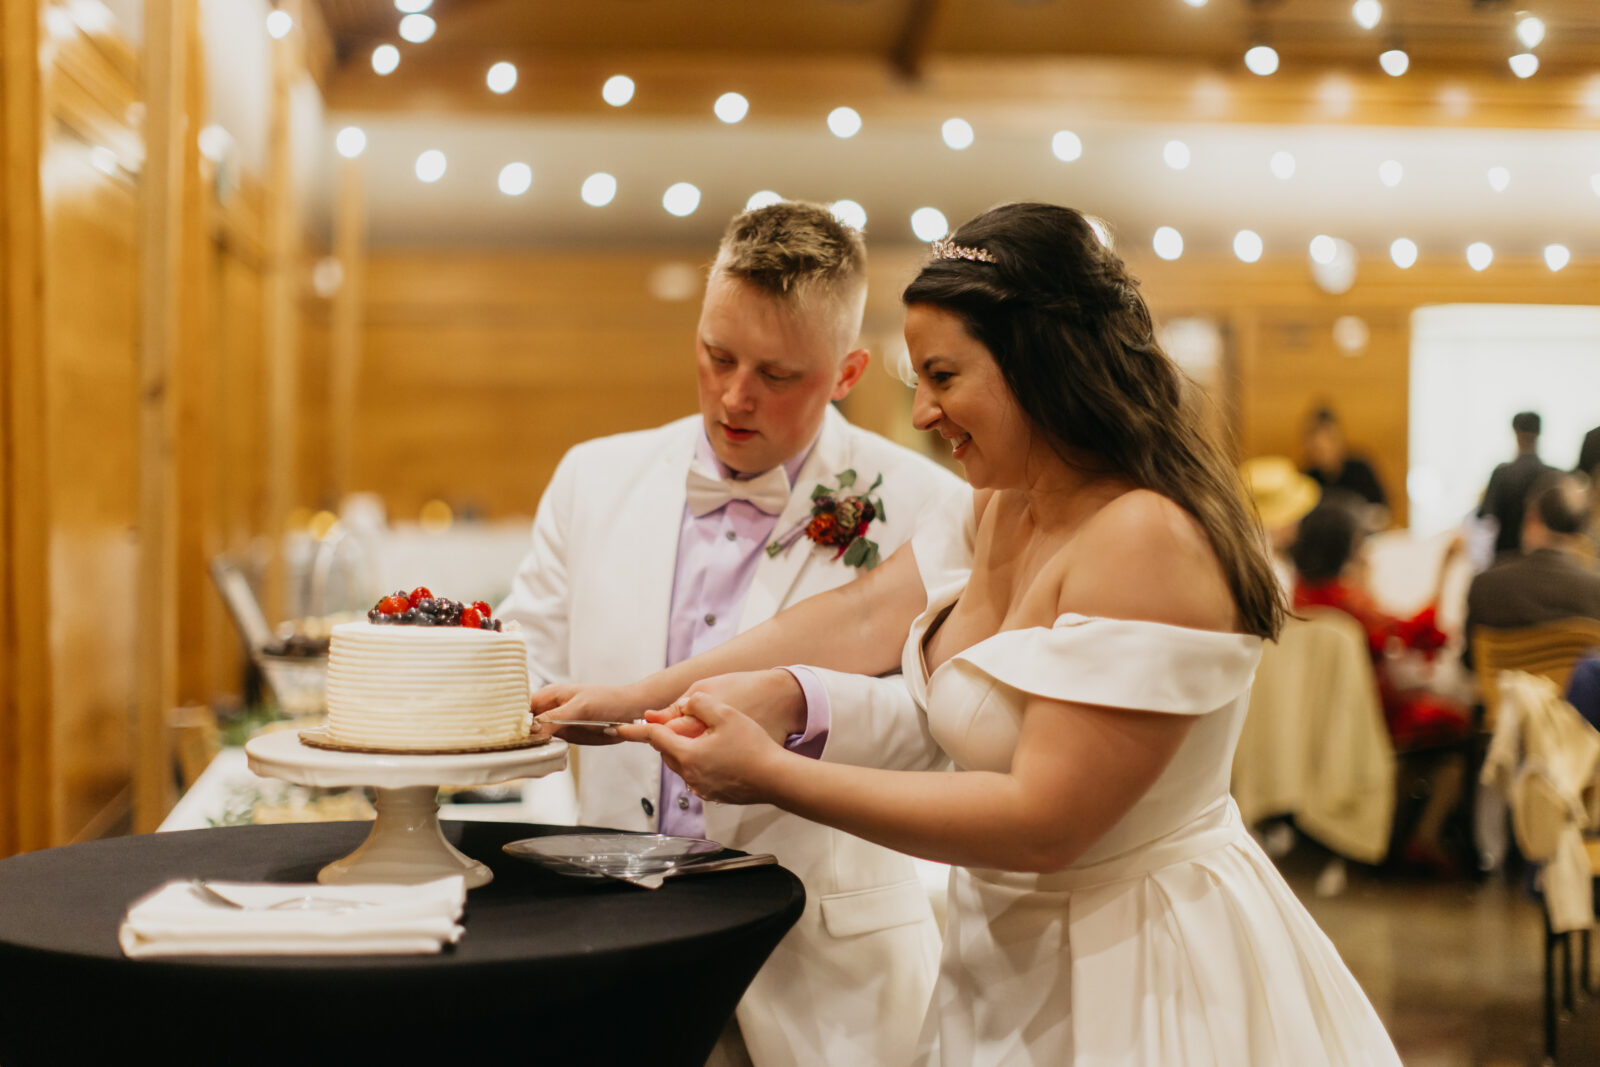 A photo of the bride and groom during their slicing of the cake